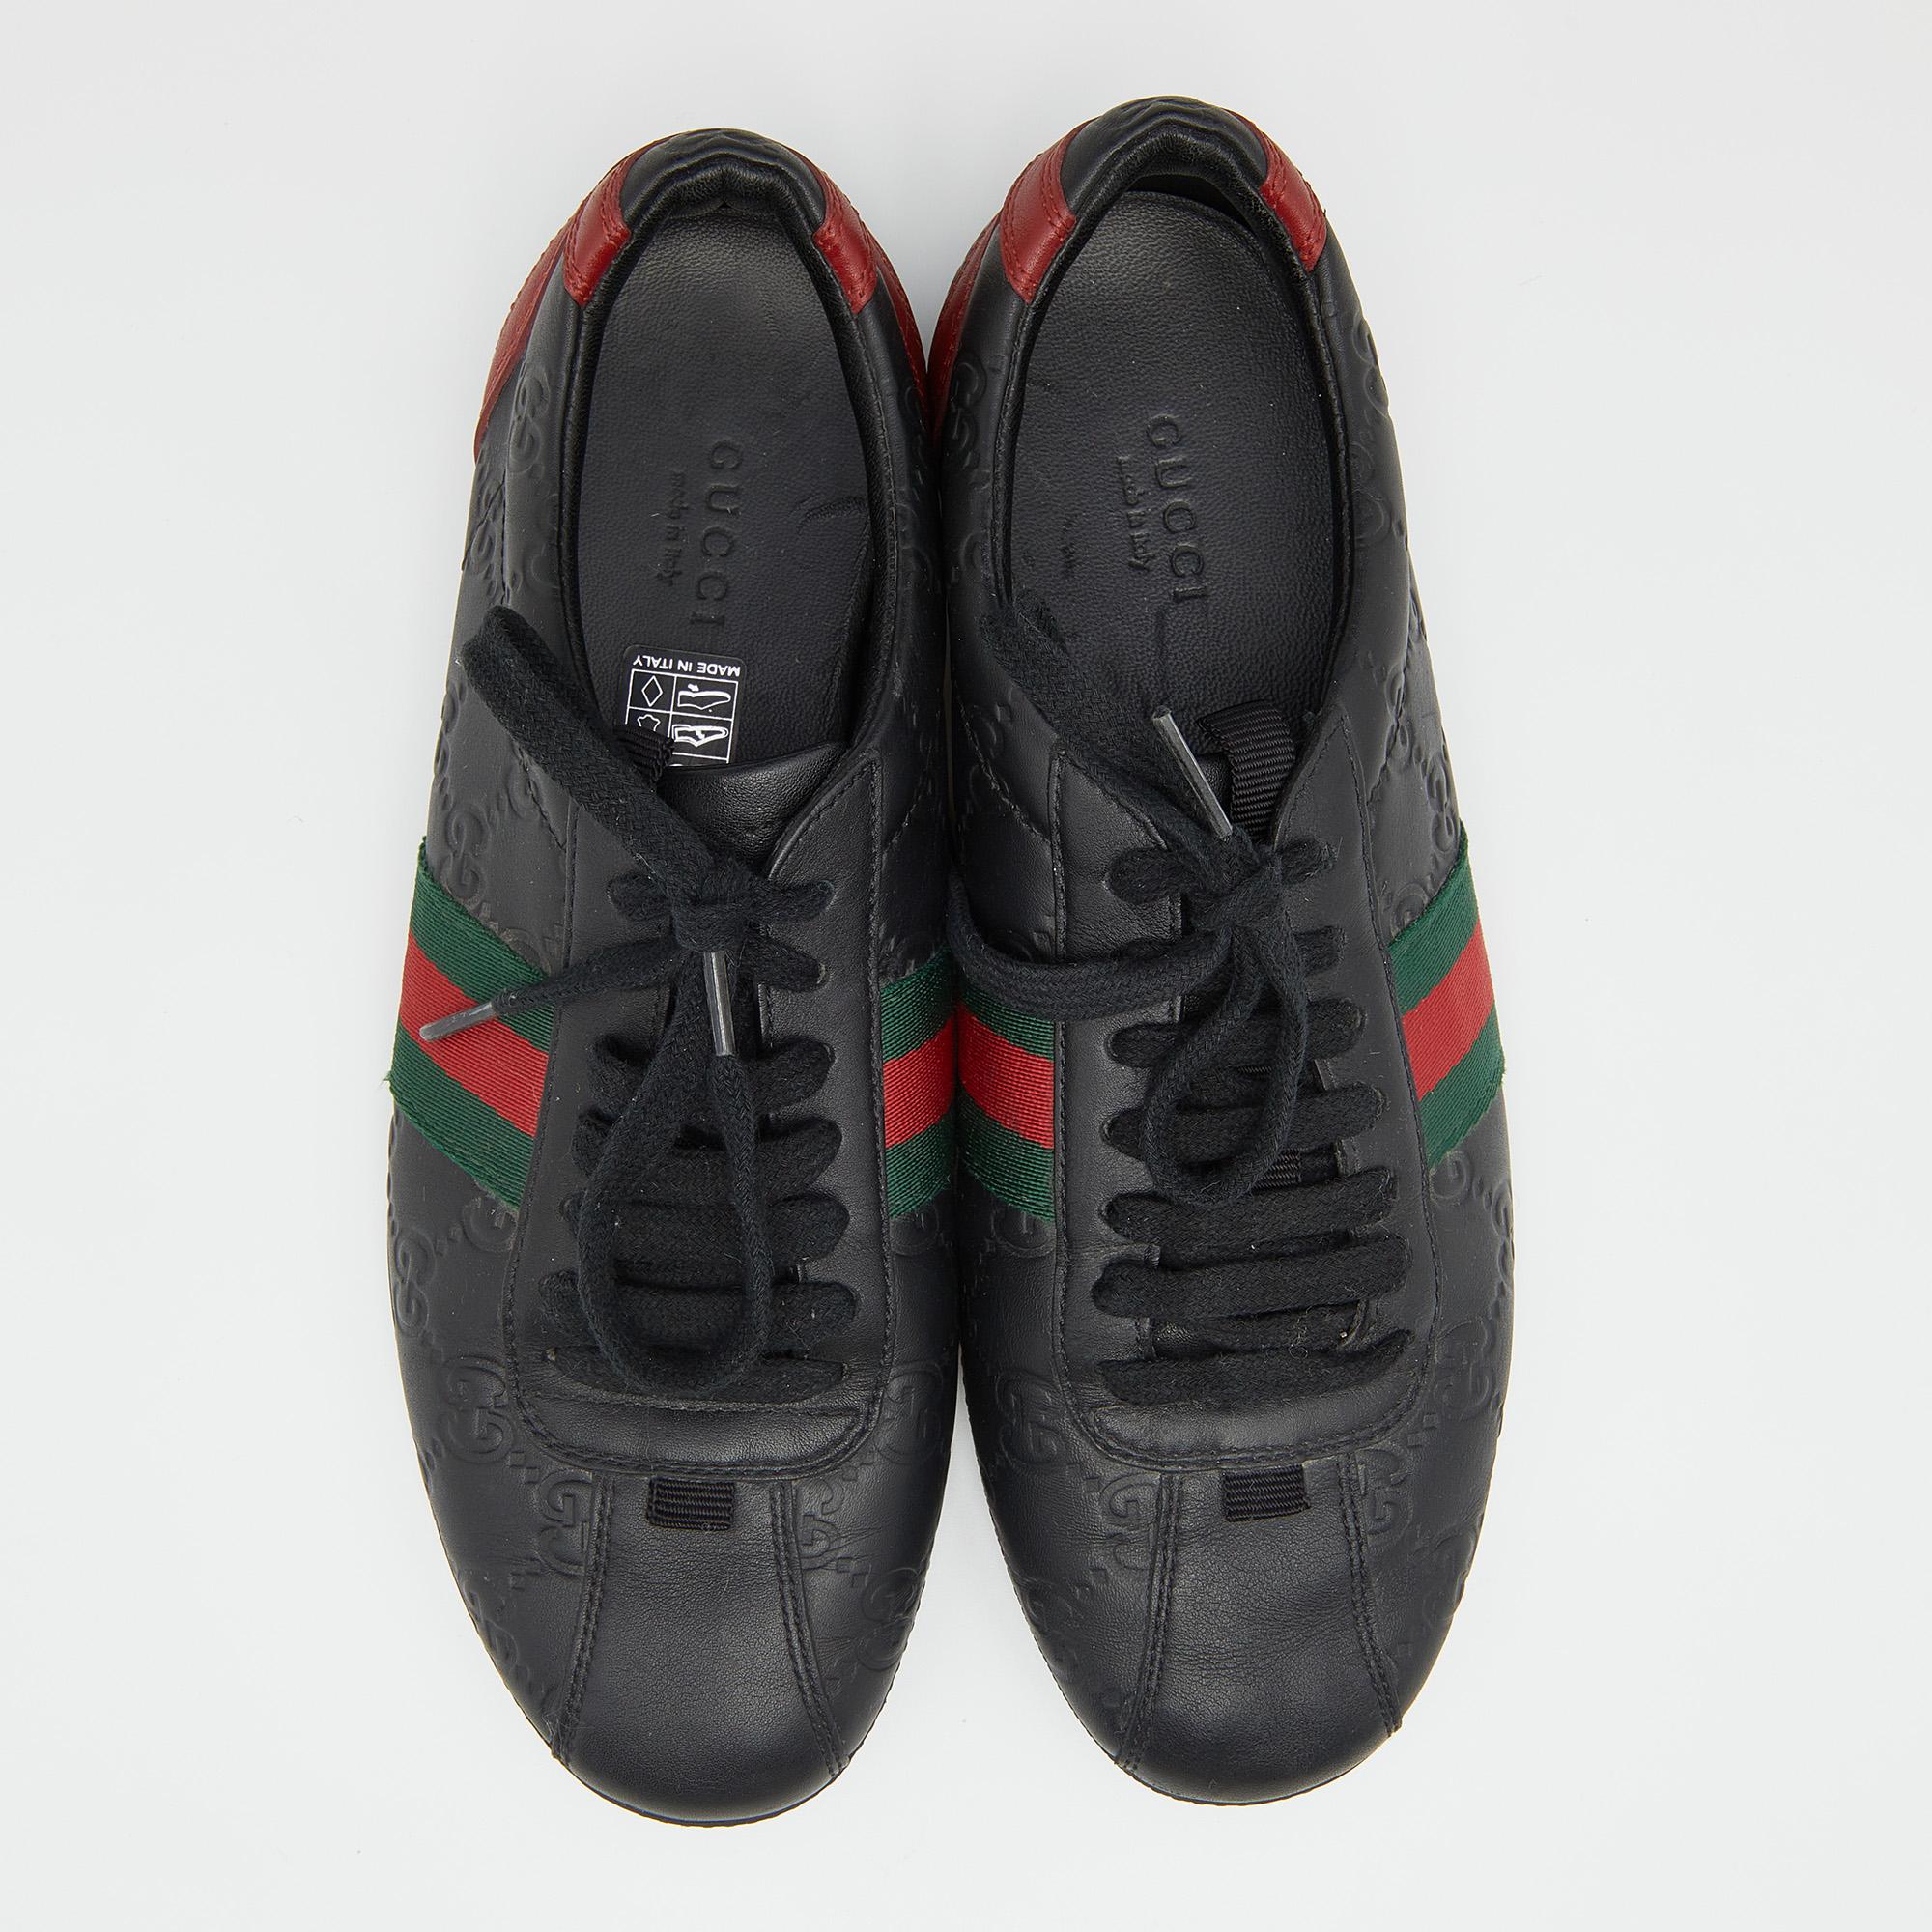 These sneakers from the House of Gucci bring you never-ending trendiness and contemporary style! They are made from black Guccissima leather into a classic low-top silhouette. They are adorned with lace-up fastenings and a Web stripe trim on their